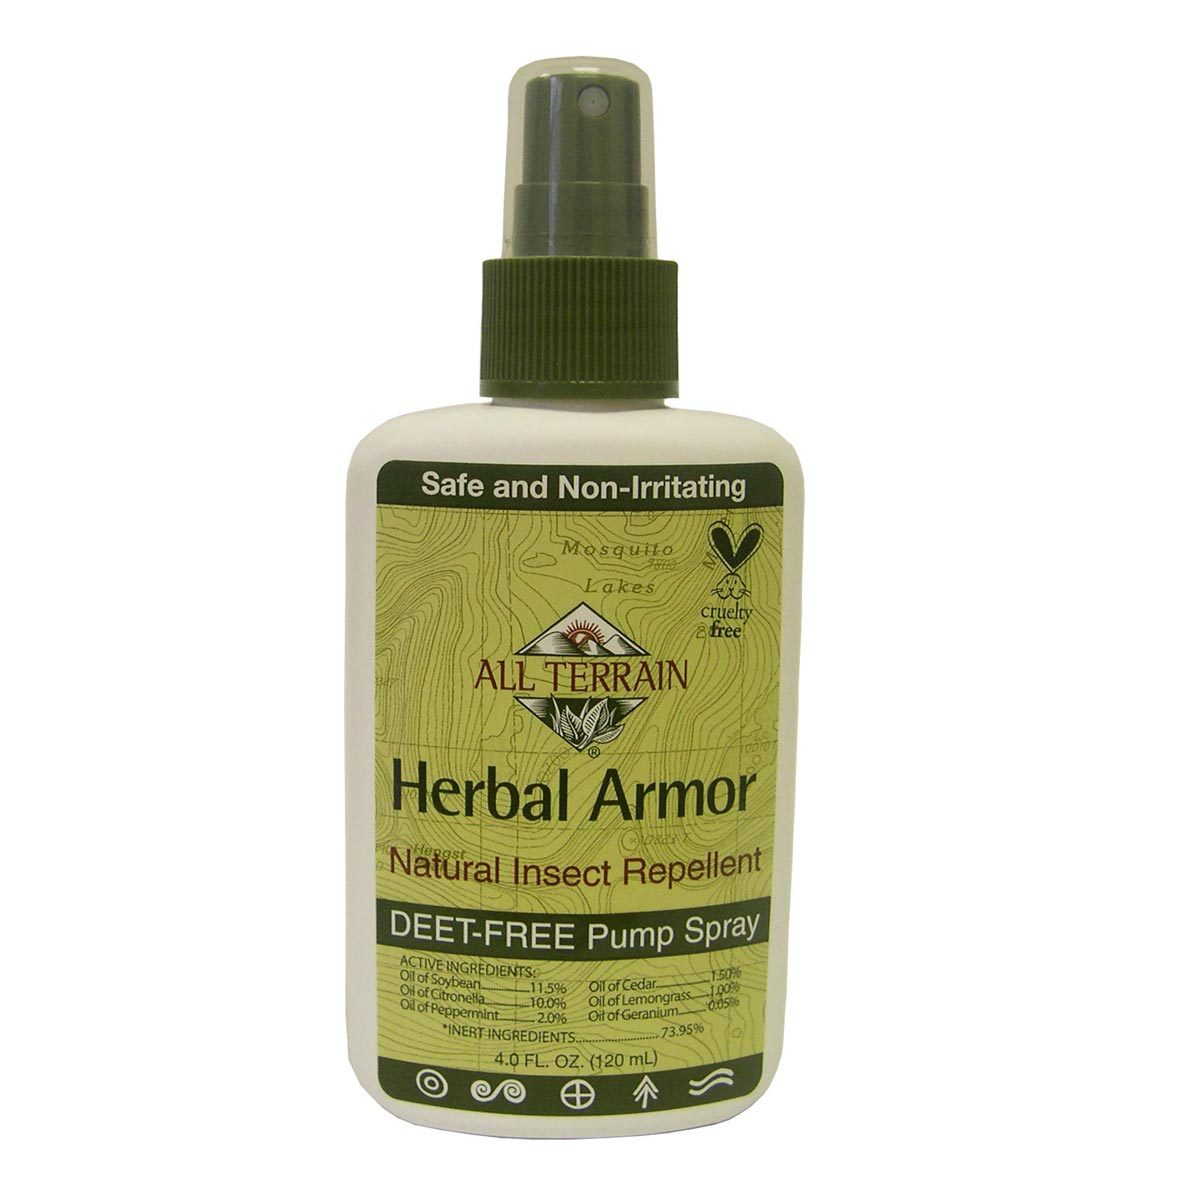 Primary image of Herbal Armor Insect Repellant